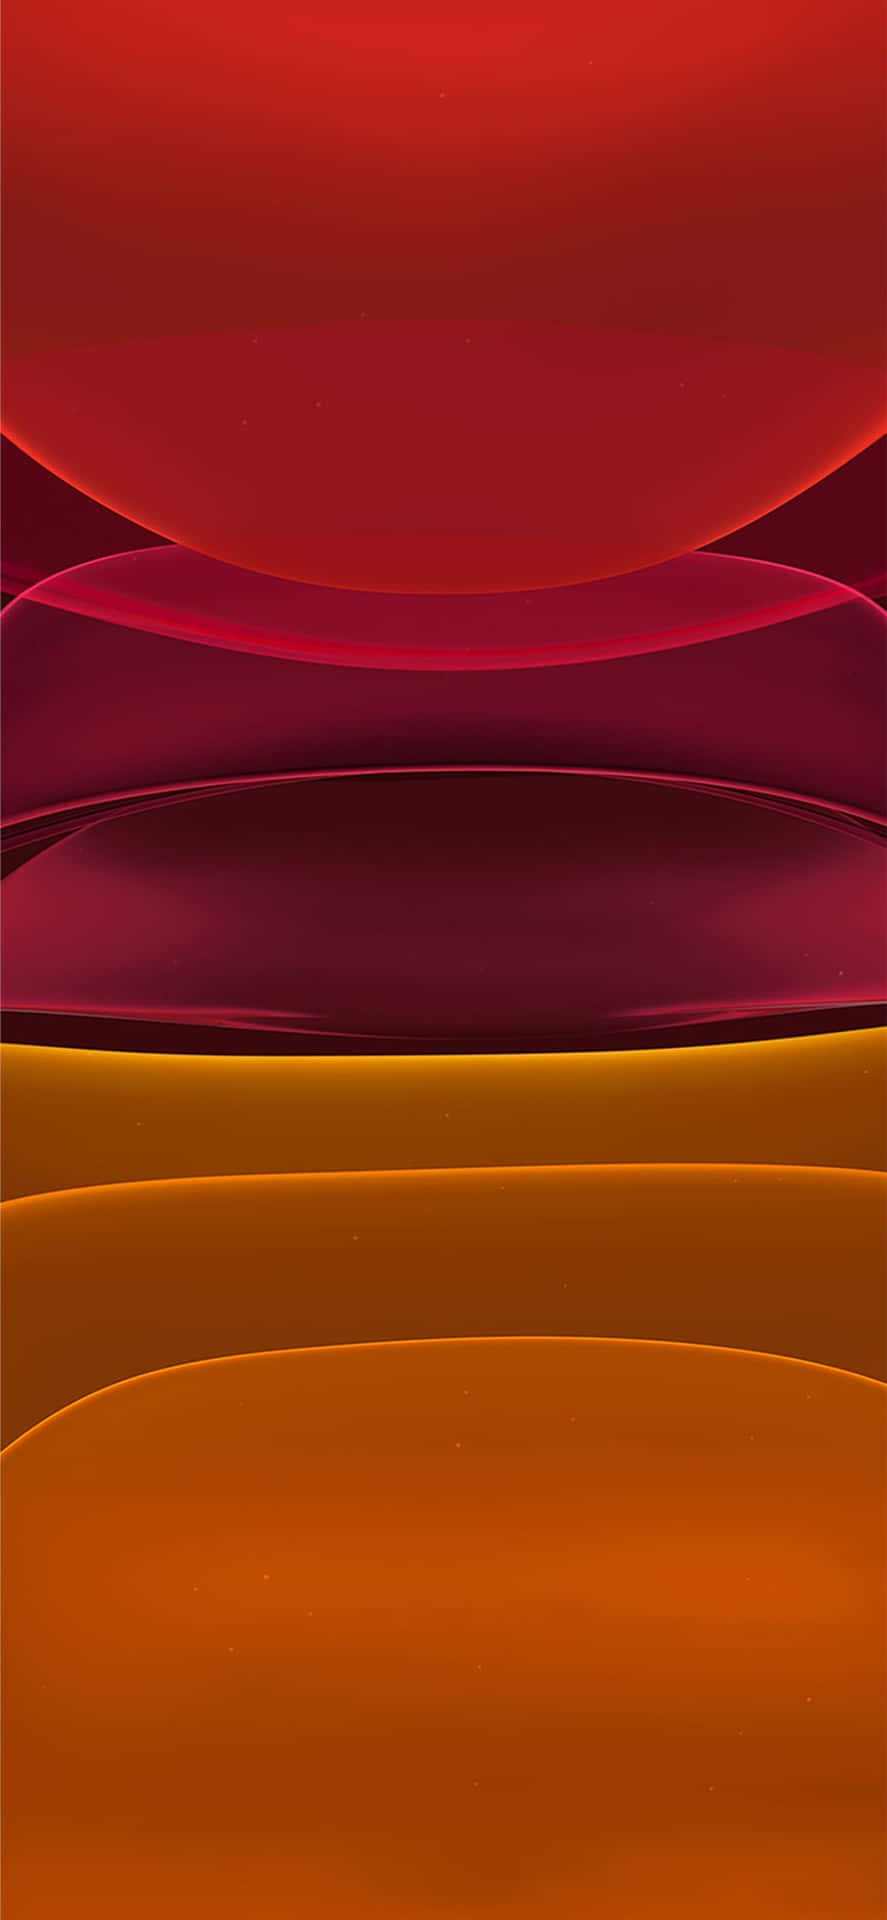 Download Iphones Xs Max Abstract Red And Orange Wallpaper 